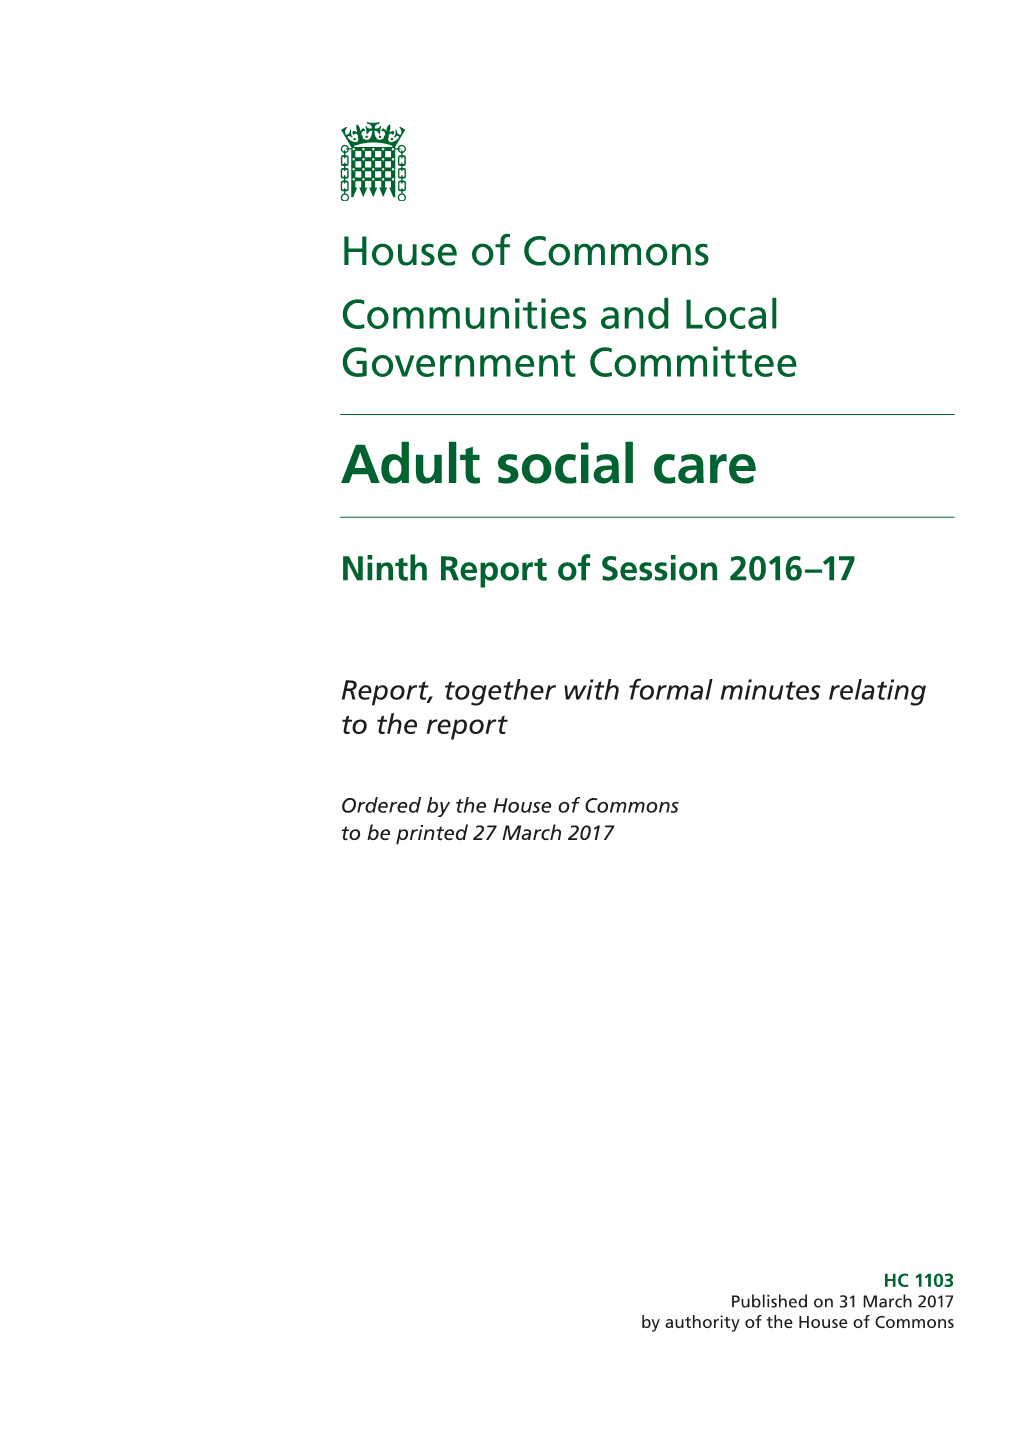 Adult Social Care Ninth Report of Session